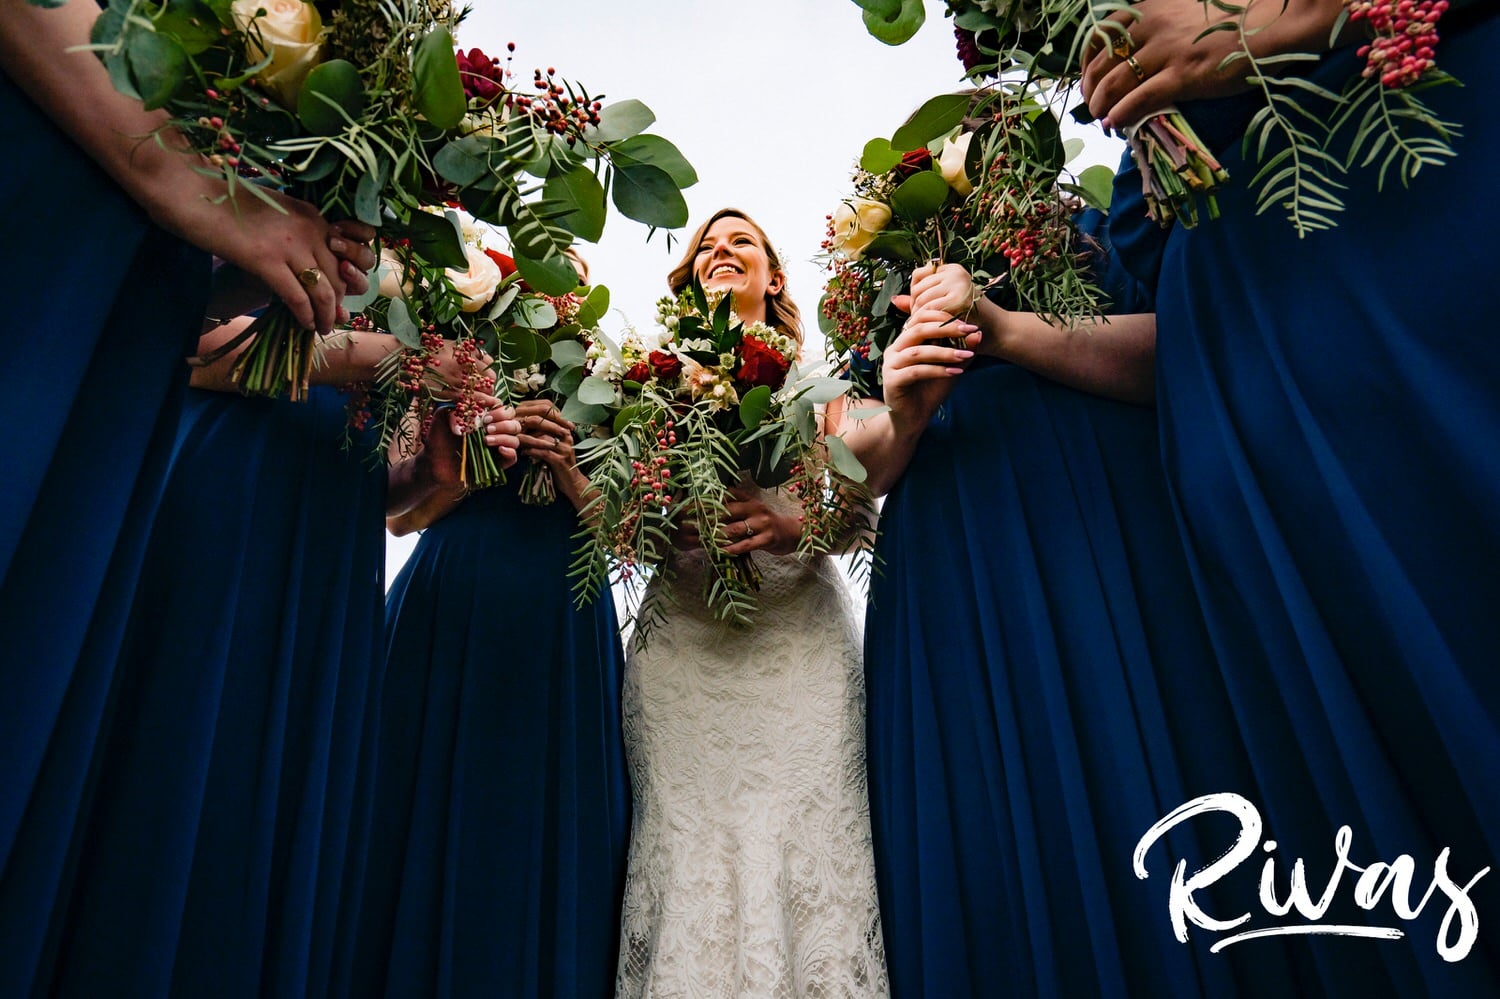 A colorful, candid picture of a bride and her bridesmaids standing together laughing on the afternoon of her fall wedding at The Barns at Hamilton Station Vineyard. 